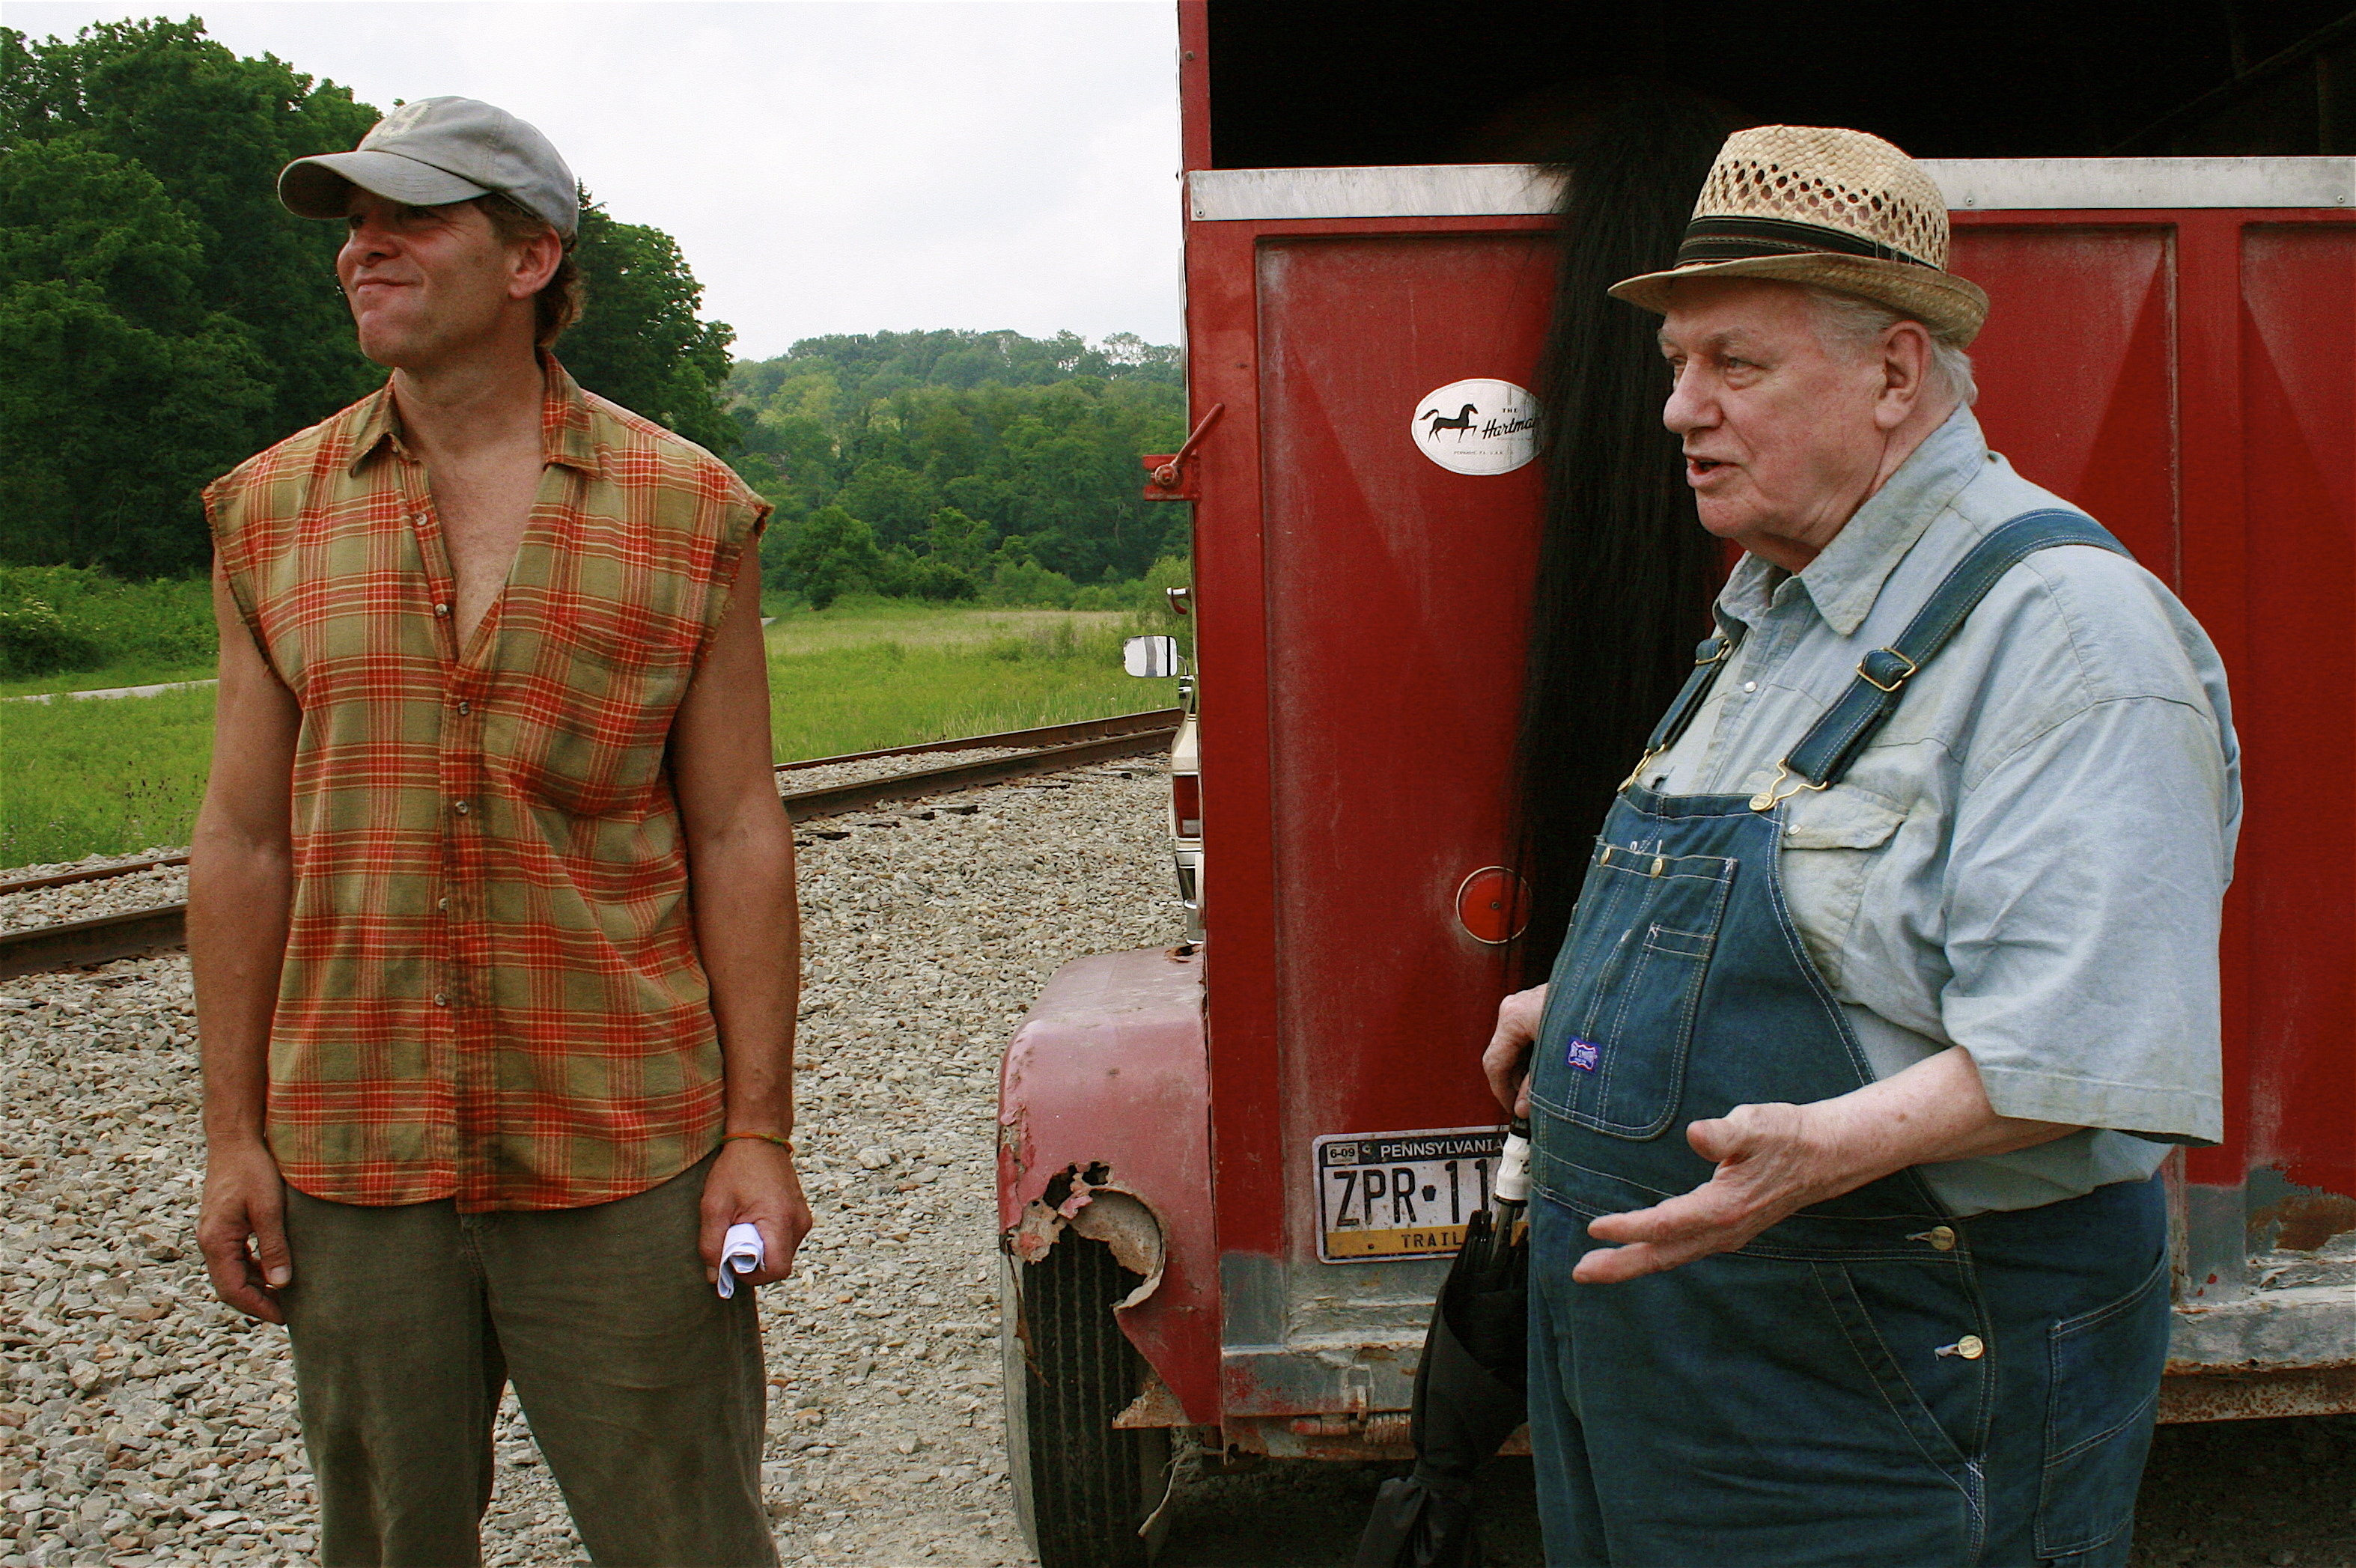 Steve Guttenberg and Charles Durning in Shannon's Rainbow (2009)